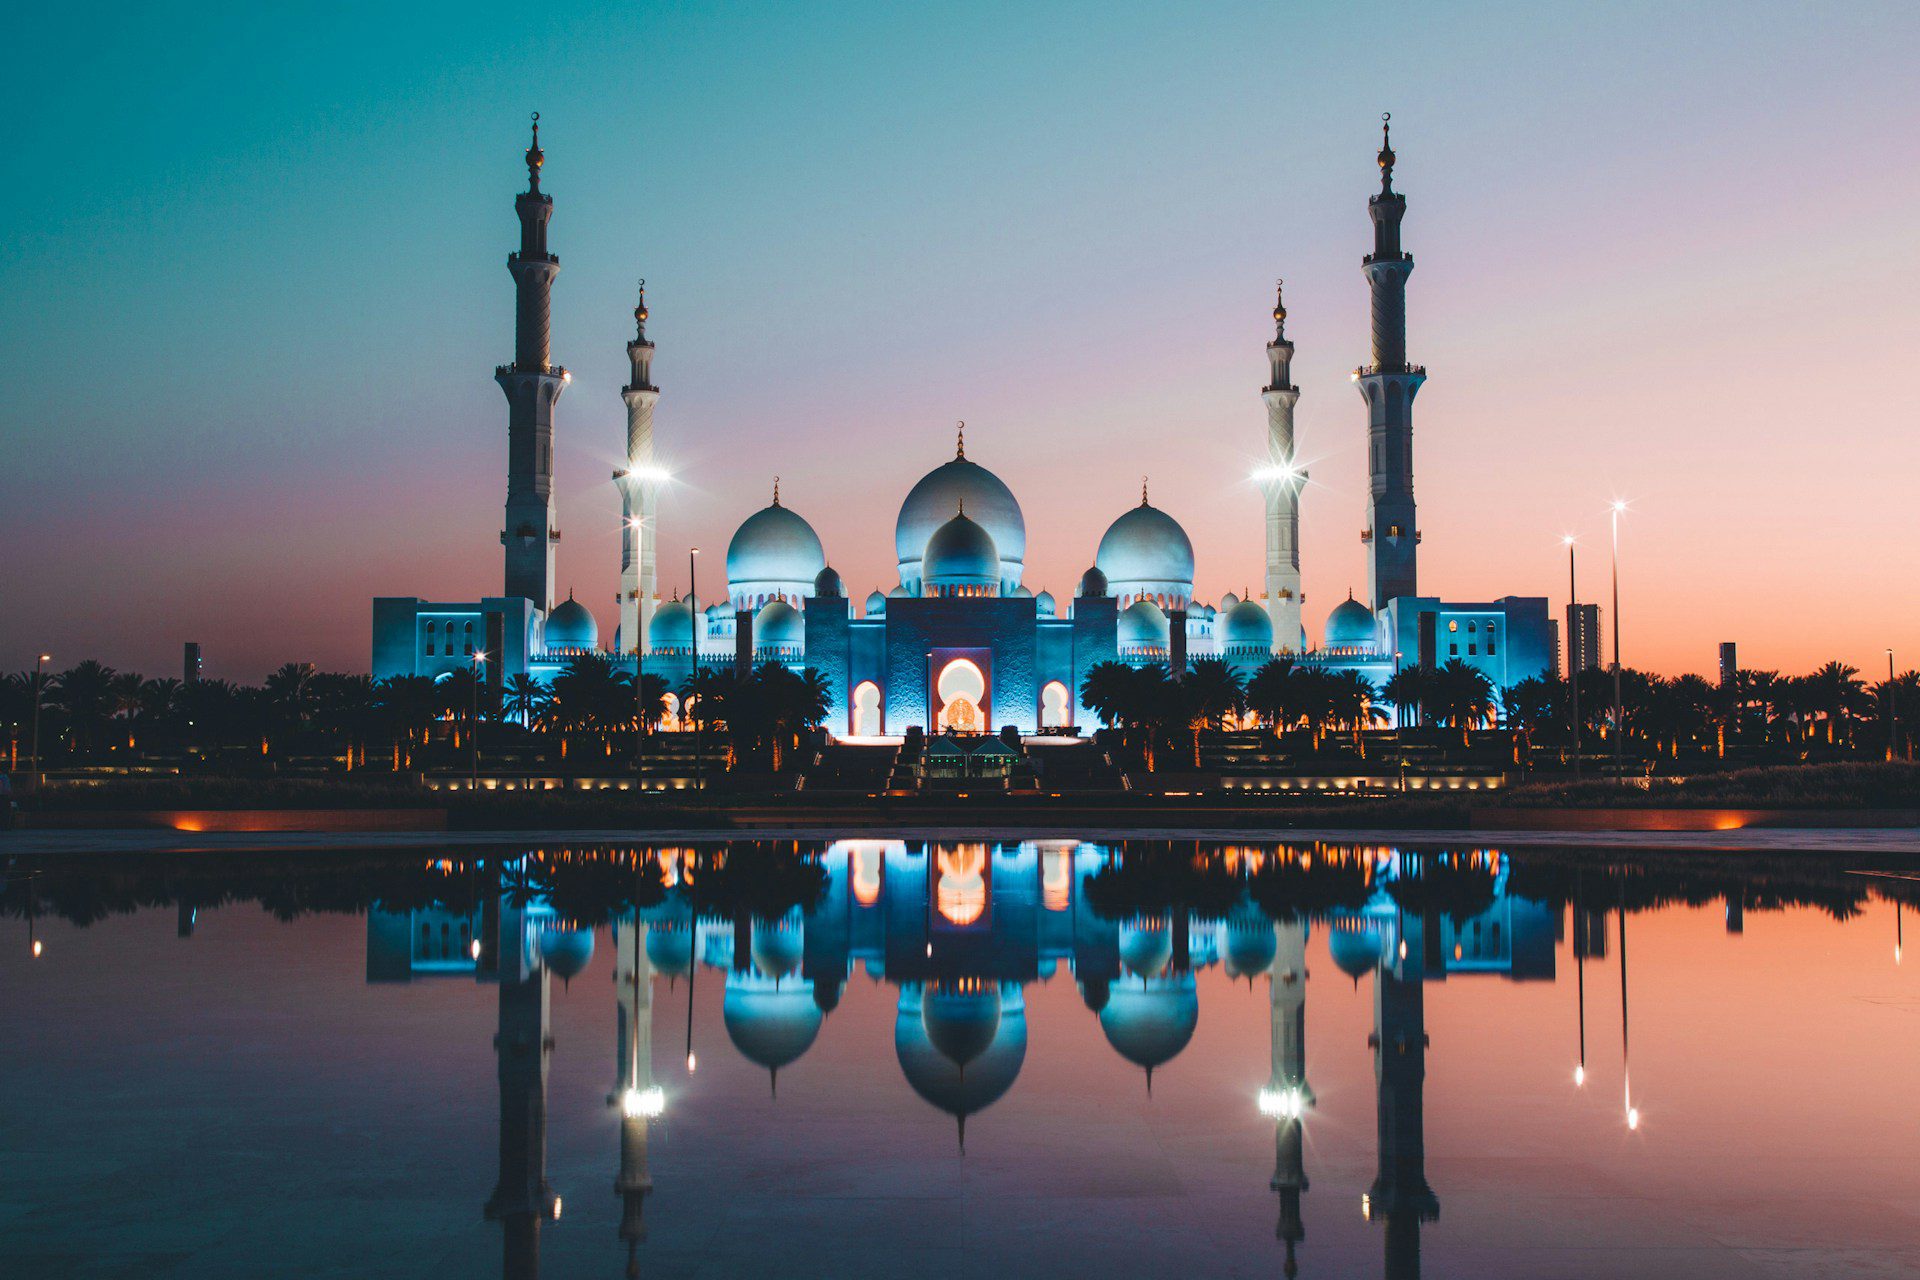 The Grand Mosque in Abu Dhabi at night, with a large body of water in front.